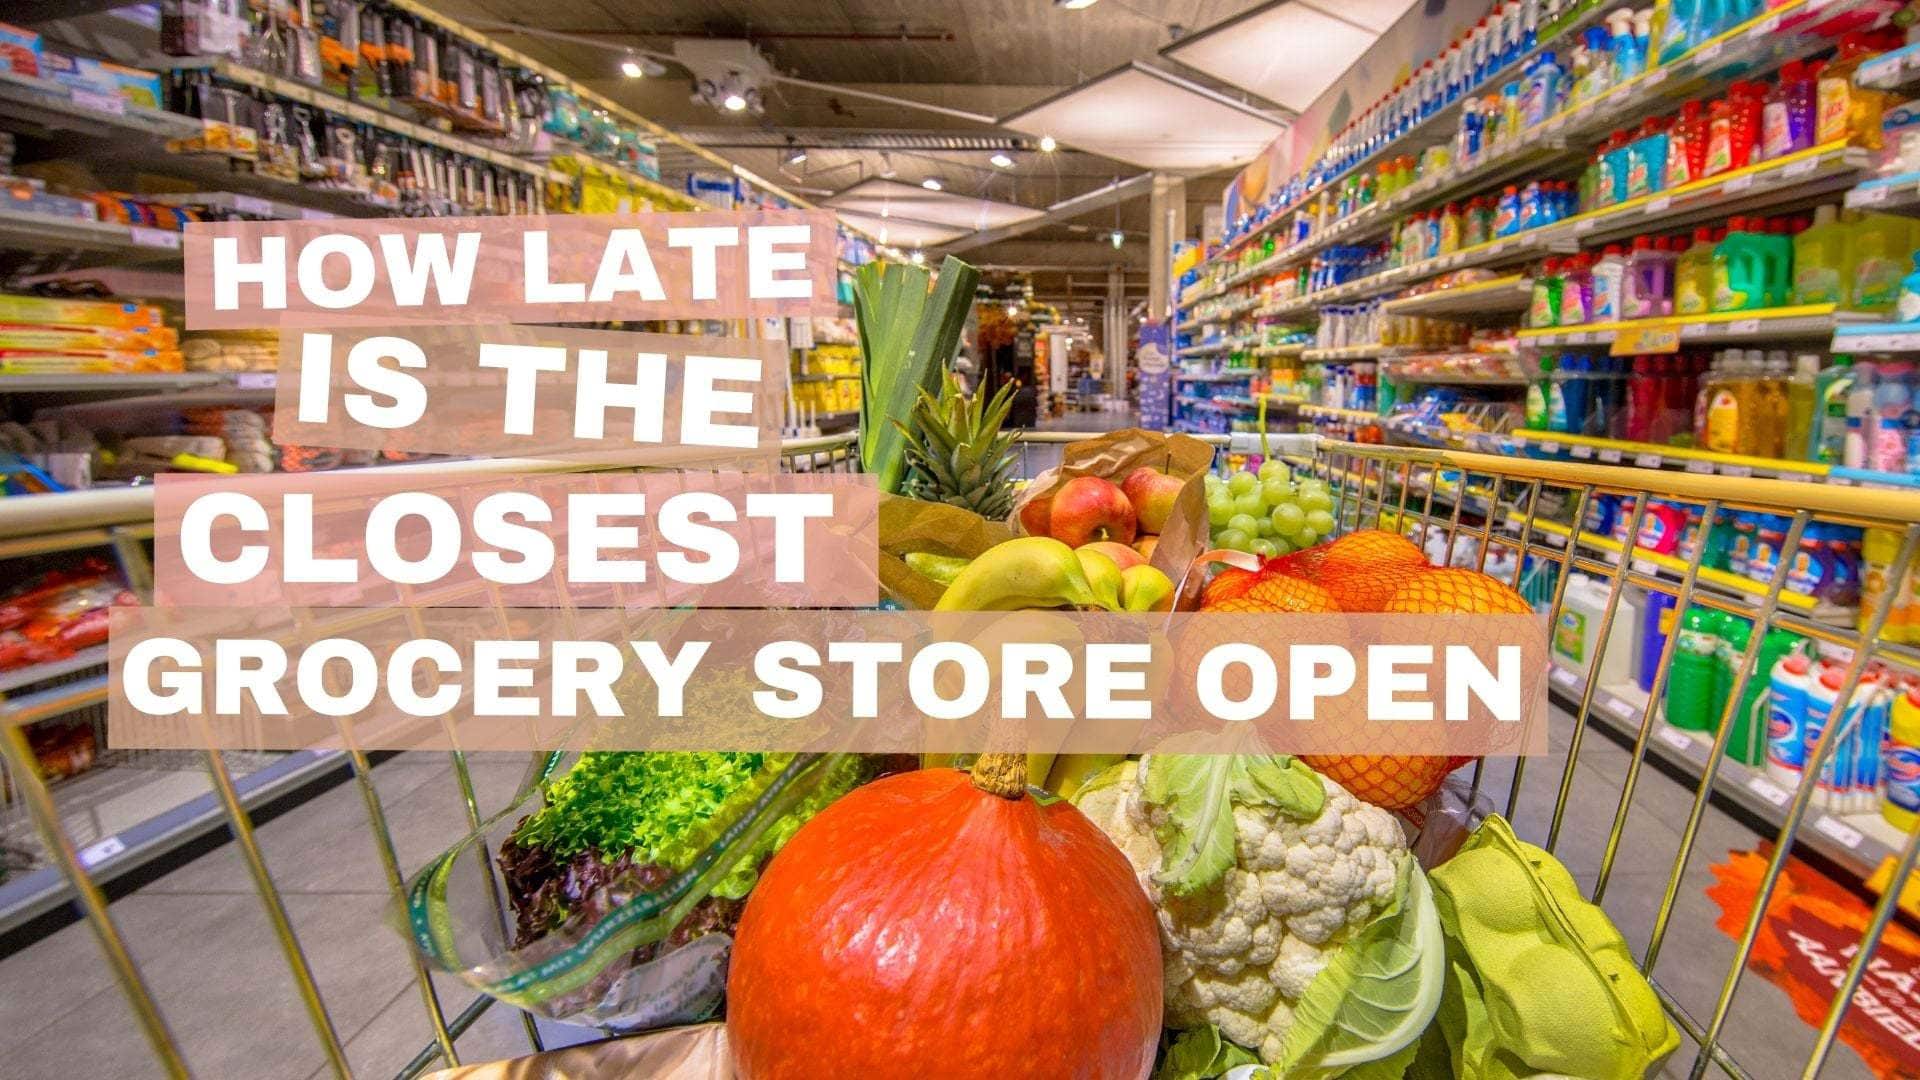 Grocery store near me. How late is the closest grocery Store open?. Open Store. Supermarket open hours. British grocery Stores close.